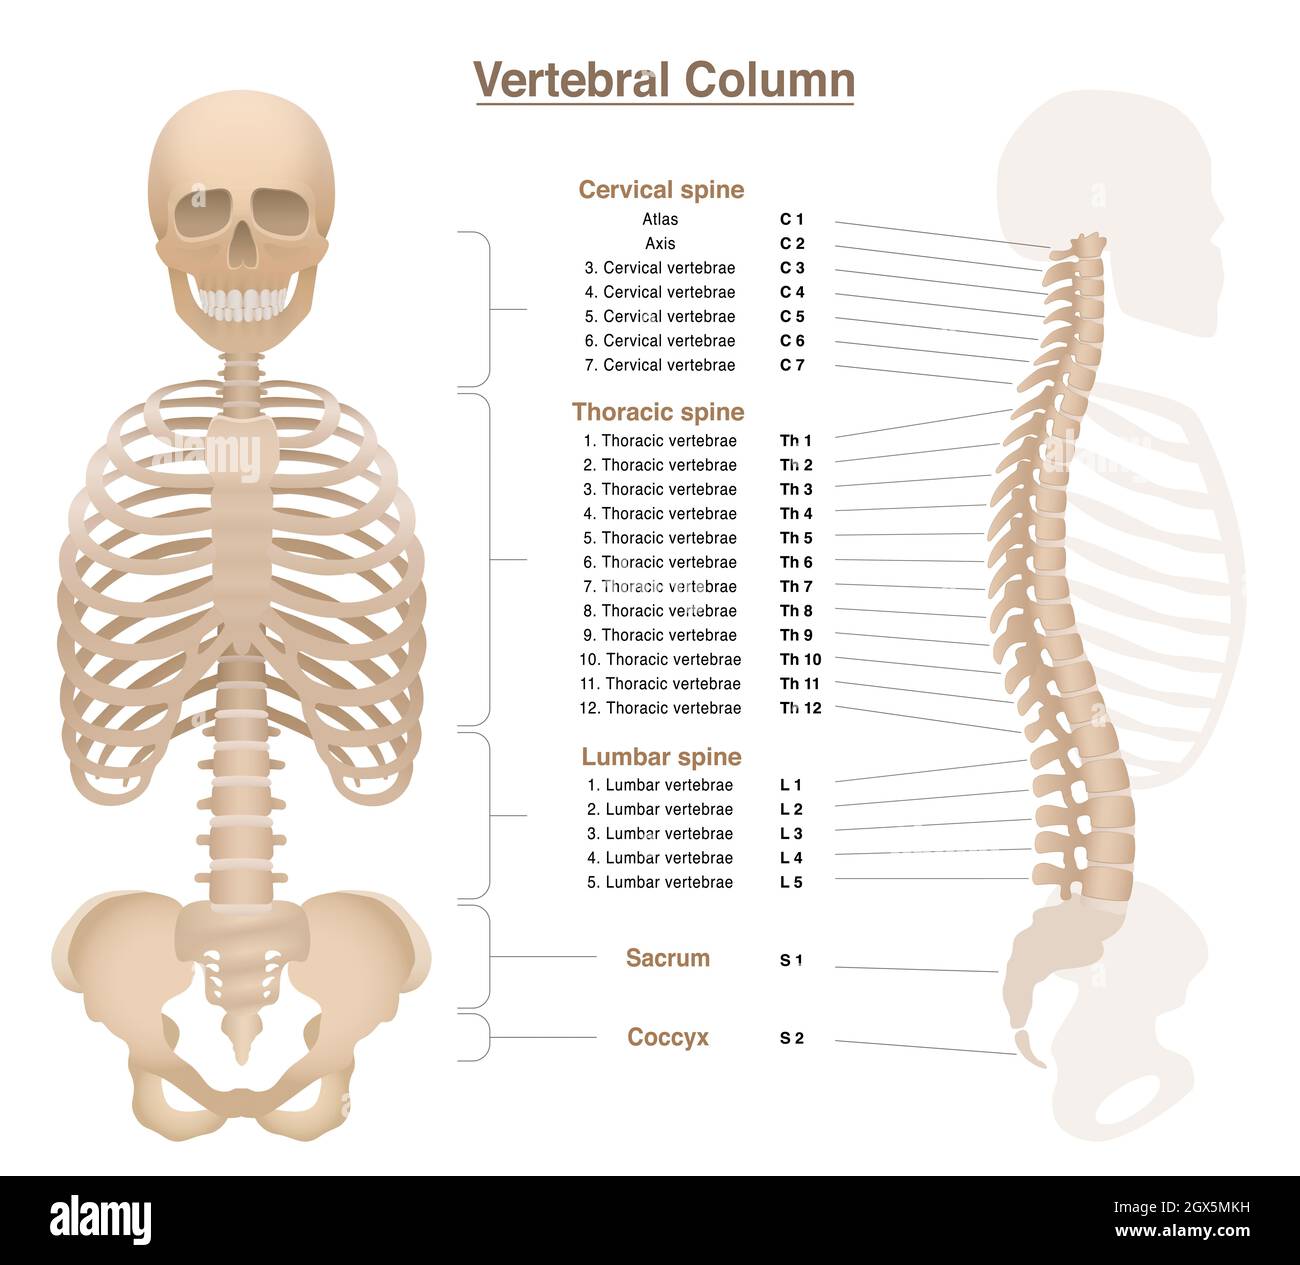 Skeleton with spine, thorax, pelvic bone and skull - labeled vertebral column chart with names and numbers of the vertebras - illustration on white. Stock Photo